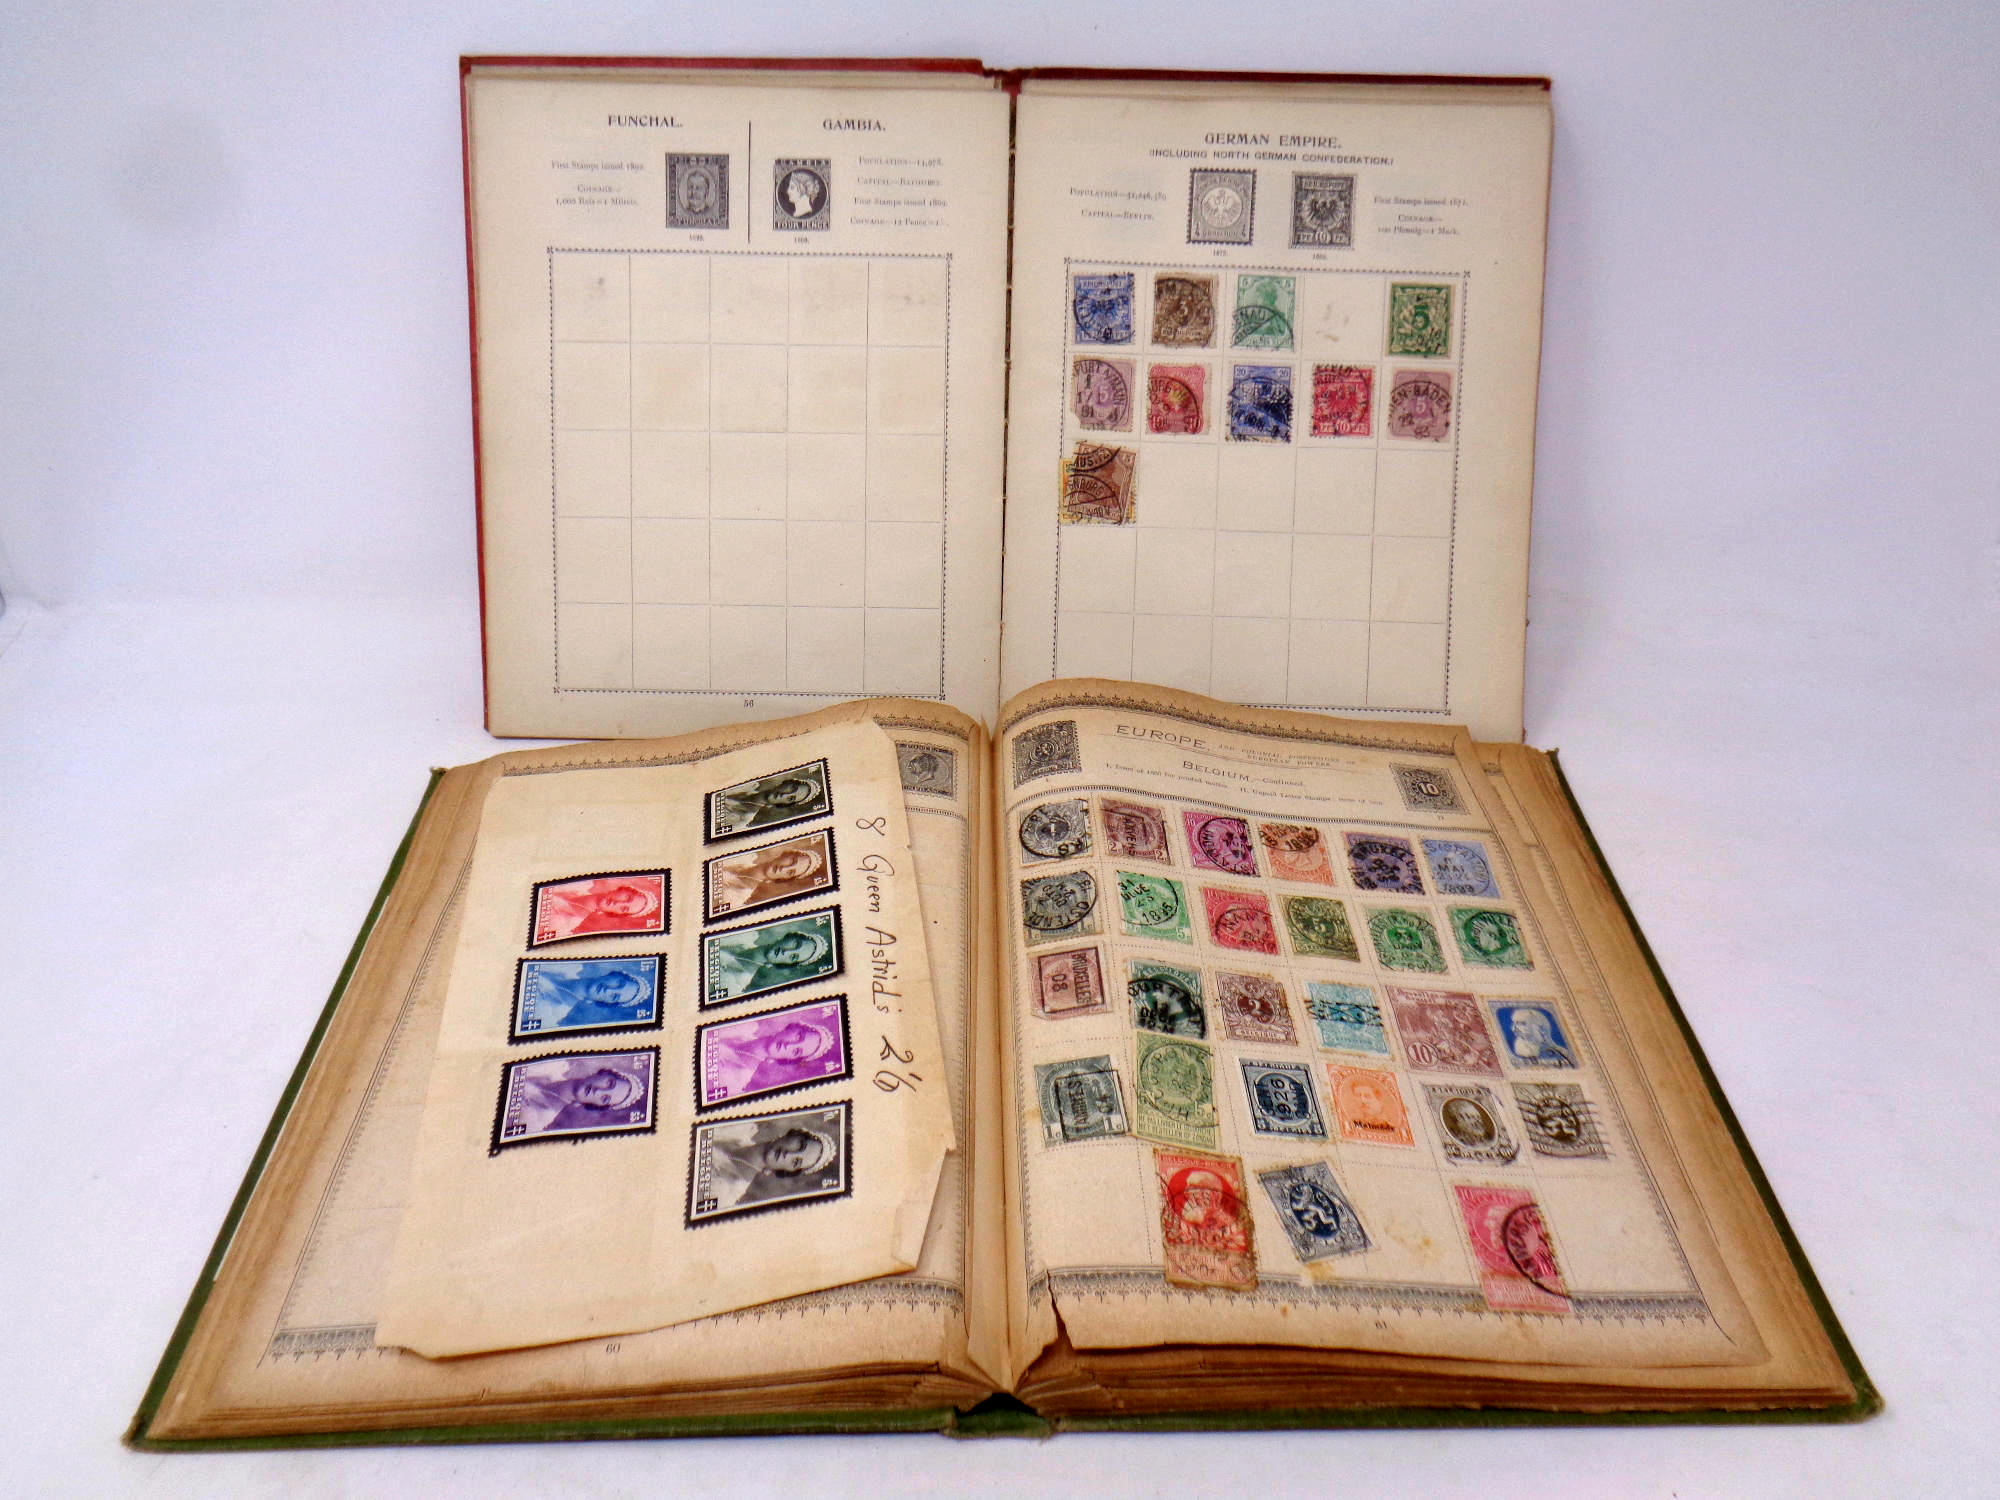 Two 20th century stamp albums containing stamps of the world